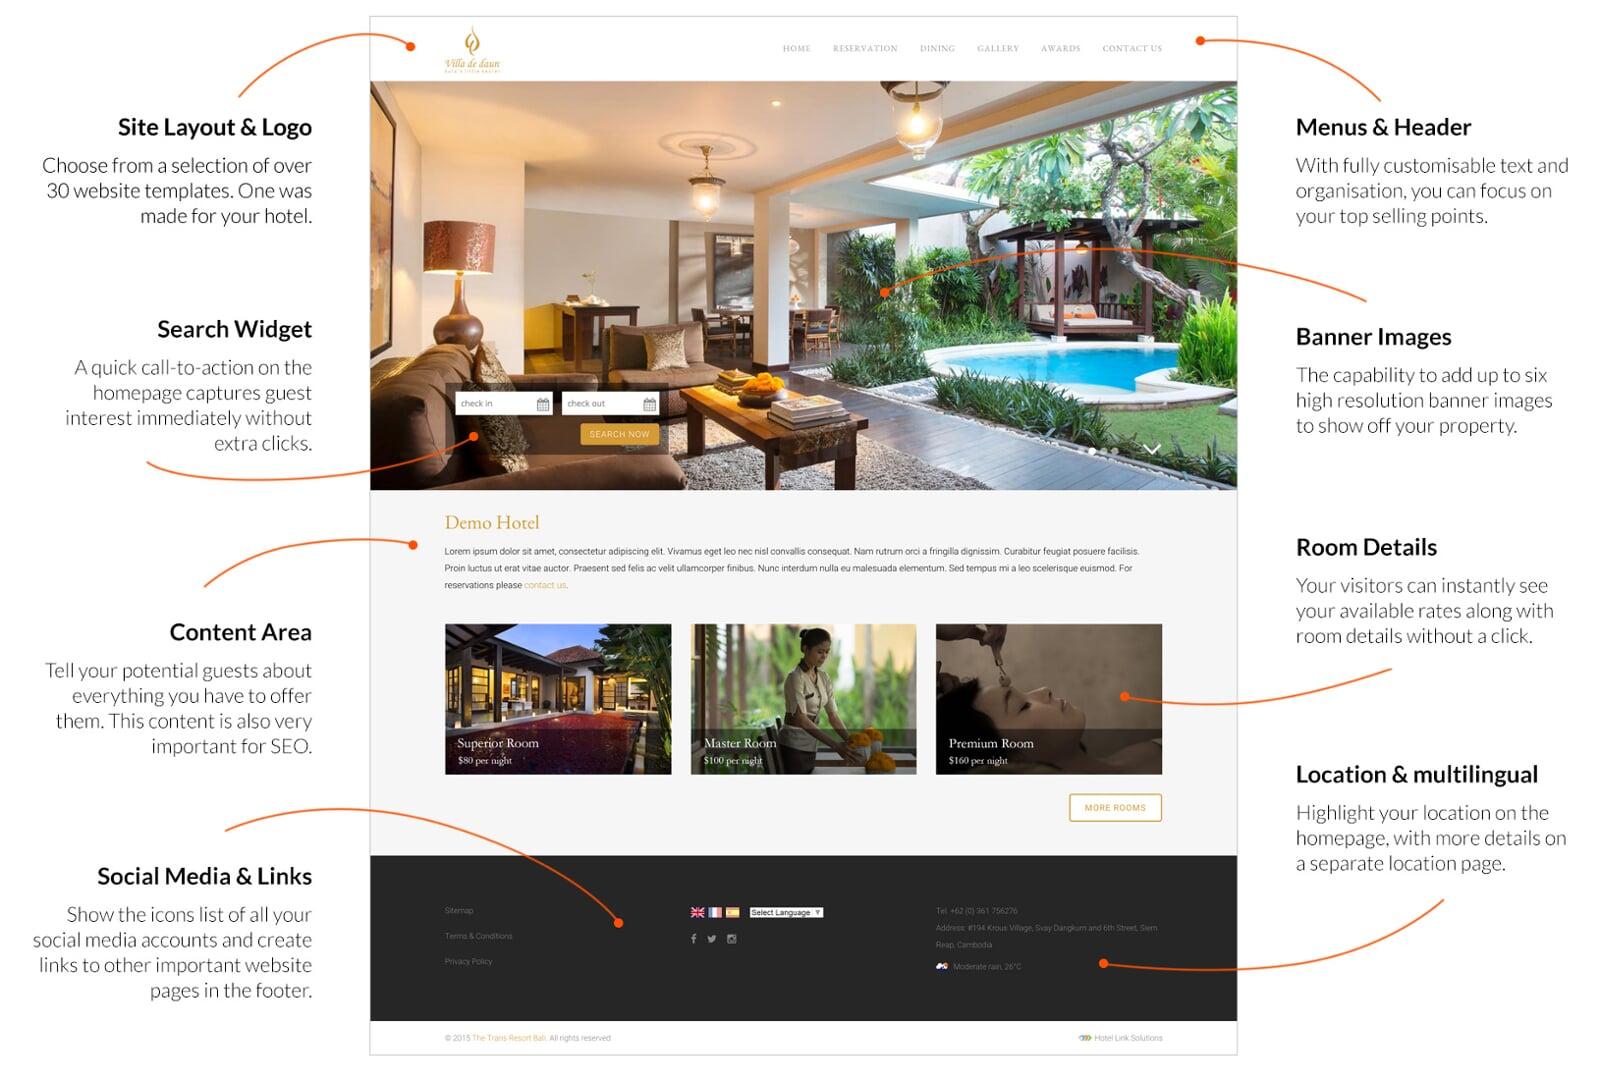 Hotel Link offers beautifully designed and easy-to-use website templates